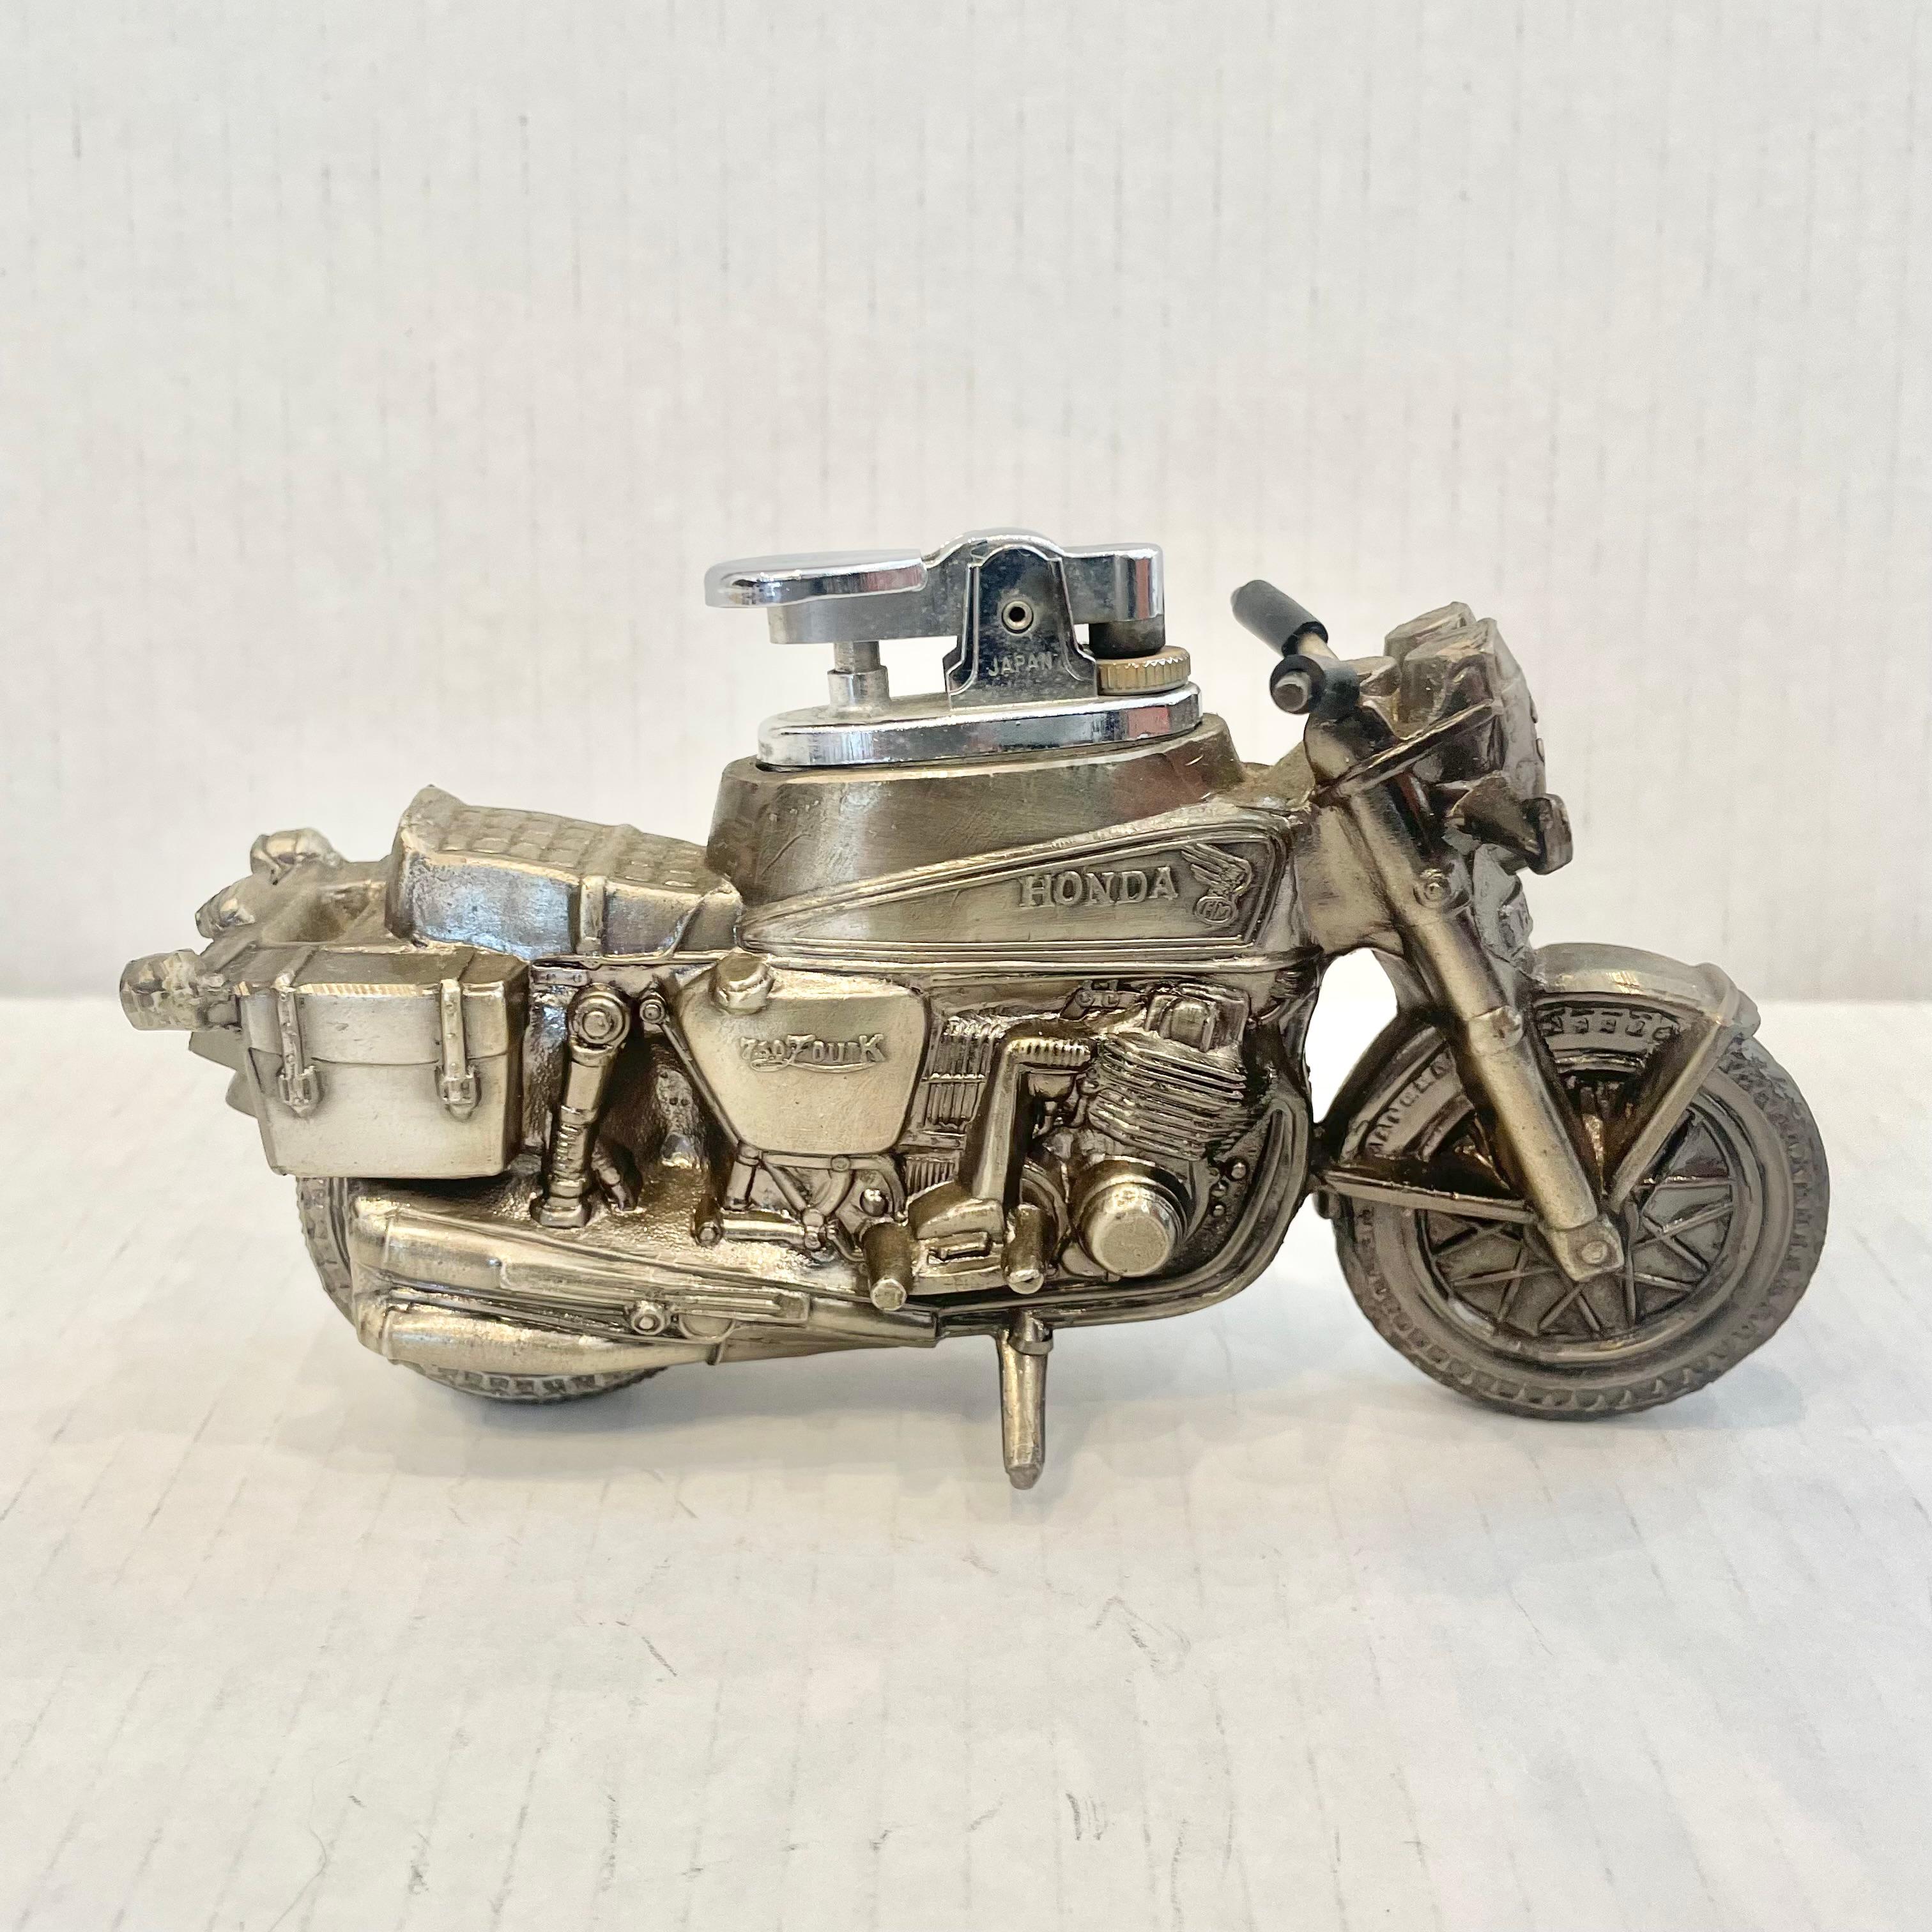 Vintage table lighter in the shape of a Honda CA 750 Dream. This great cafe racer style body is made completely of metal with a hollow body. Light patina giving this piece a classic silver color. Cool tobacco accessory and conversation piece.